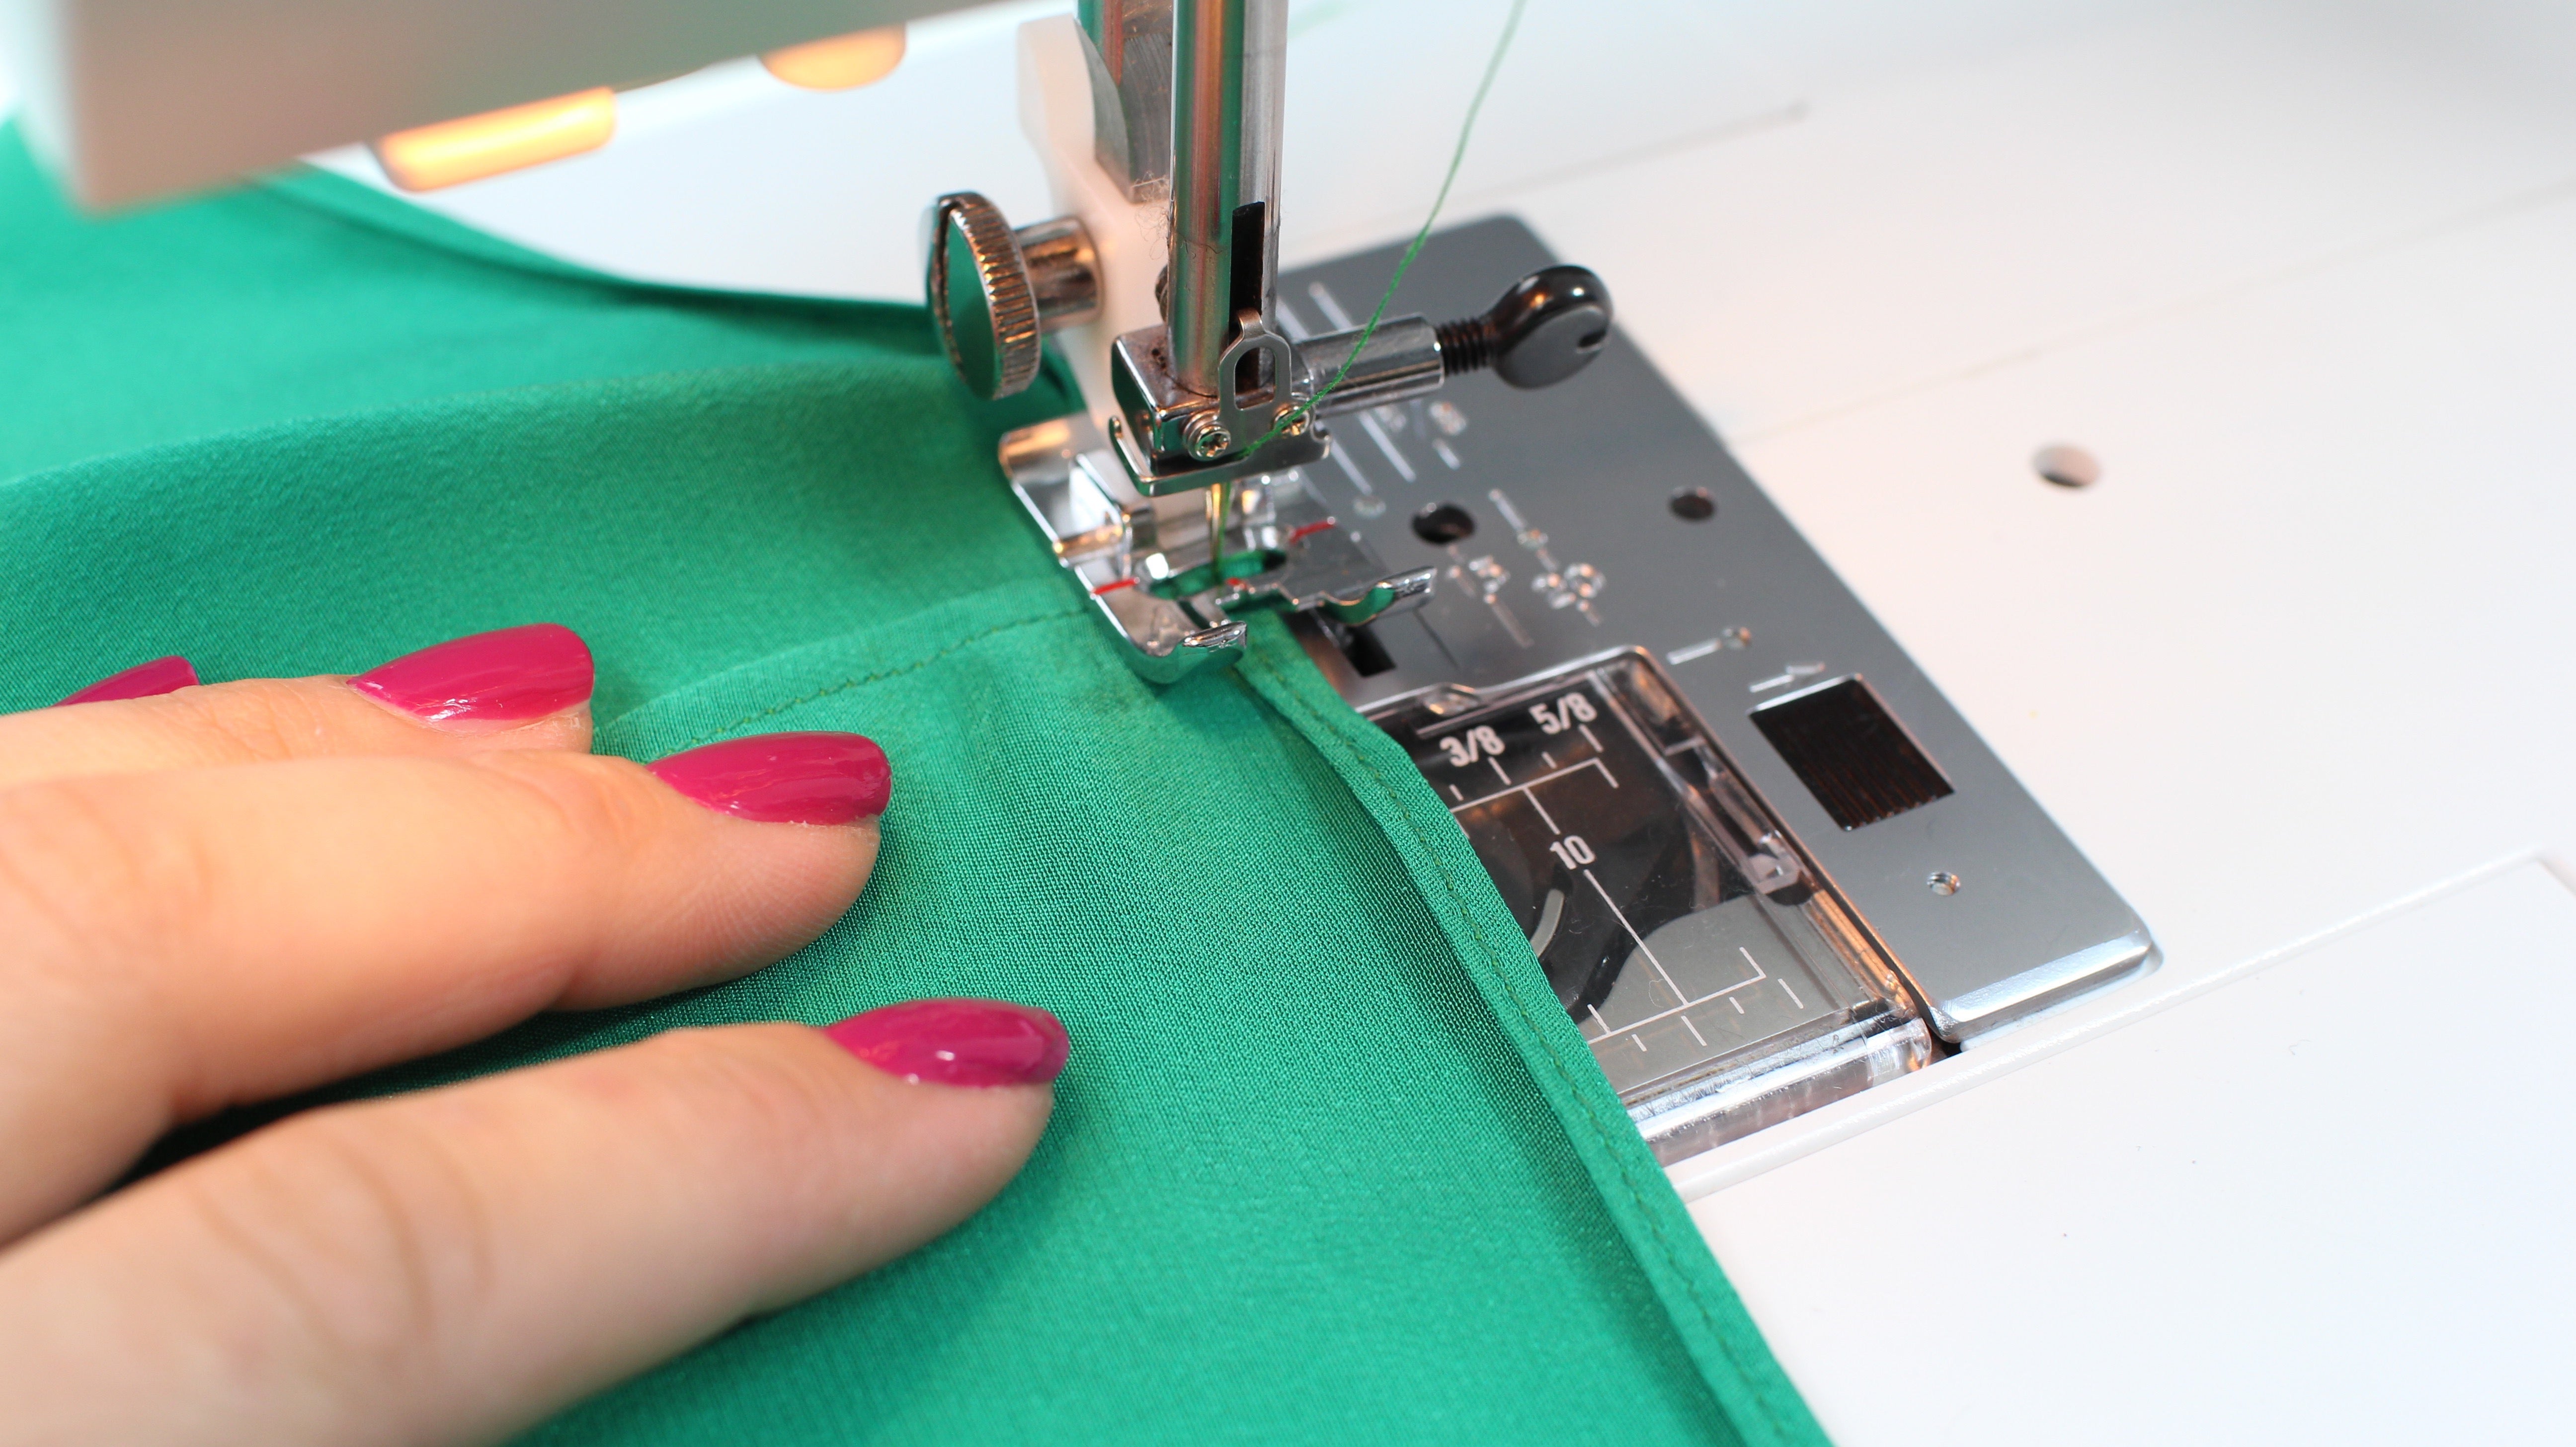 How to use a Rolled Hem Foot: A Failproof Method